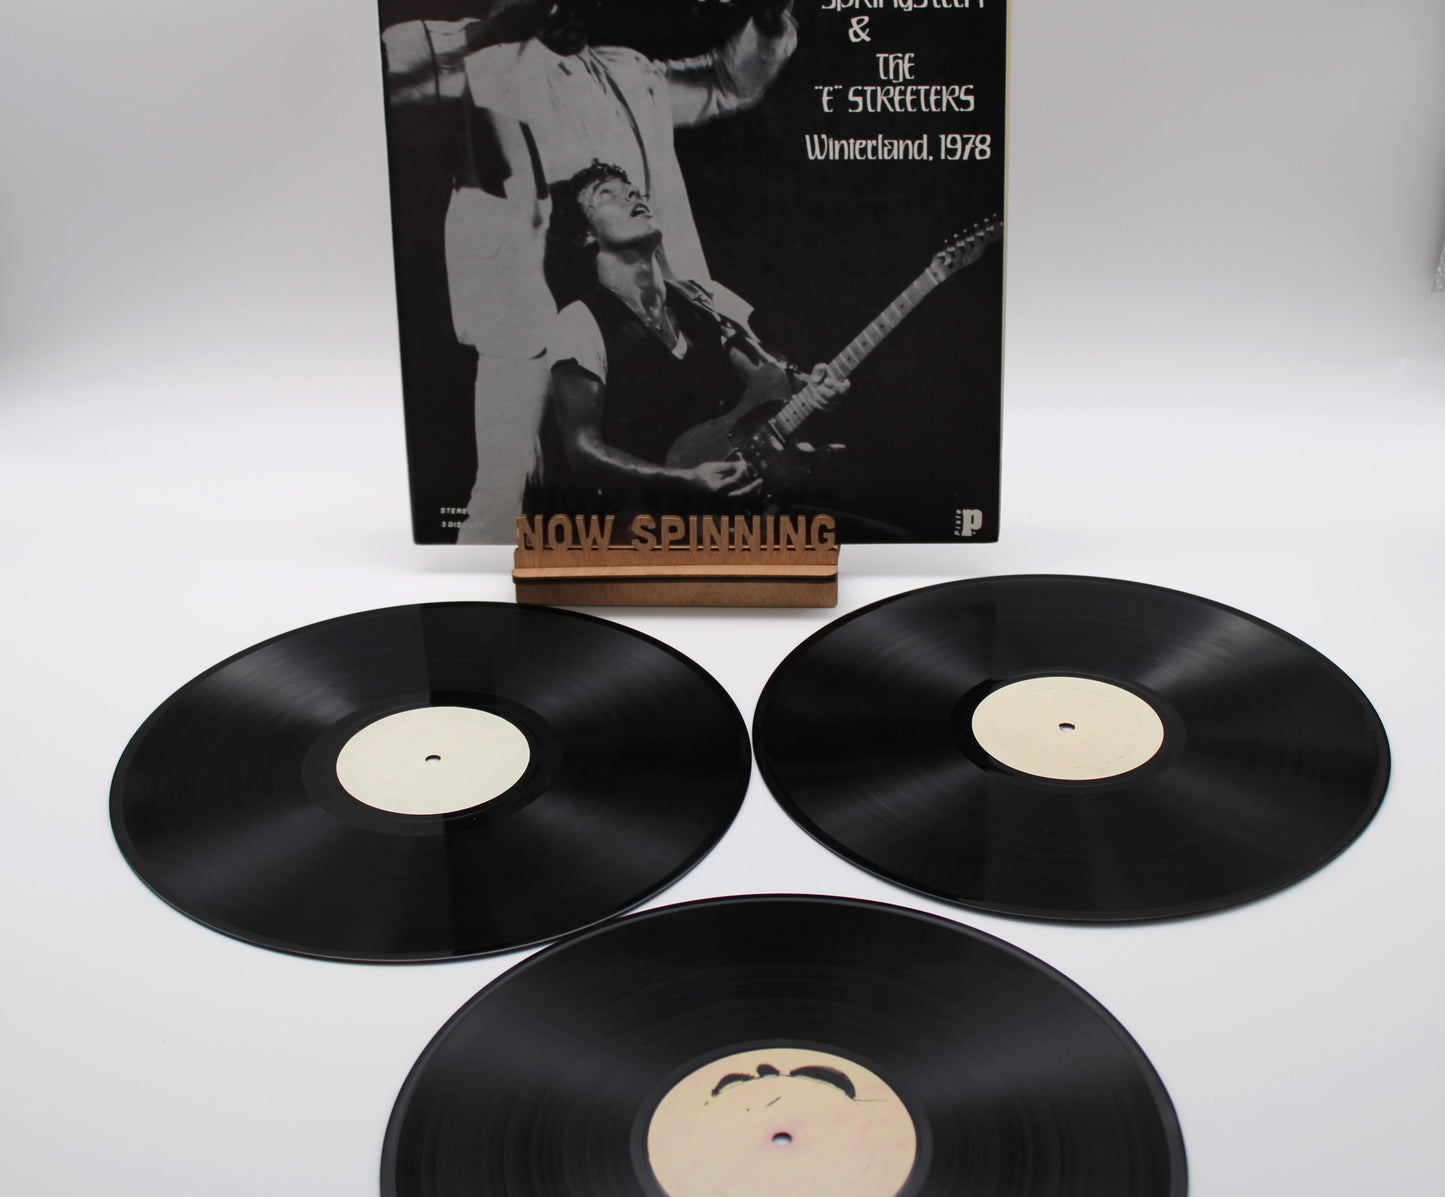 Bruce Springsteen & "E" Streeters – "Live In The Promised Land" 3LPs Winterland FRANCE IMPORT 1978 BLV